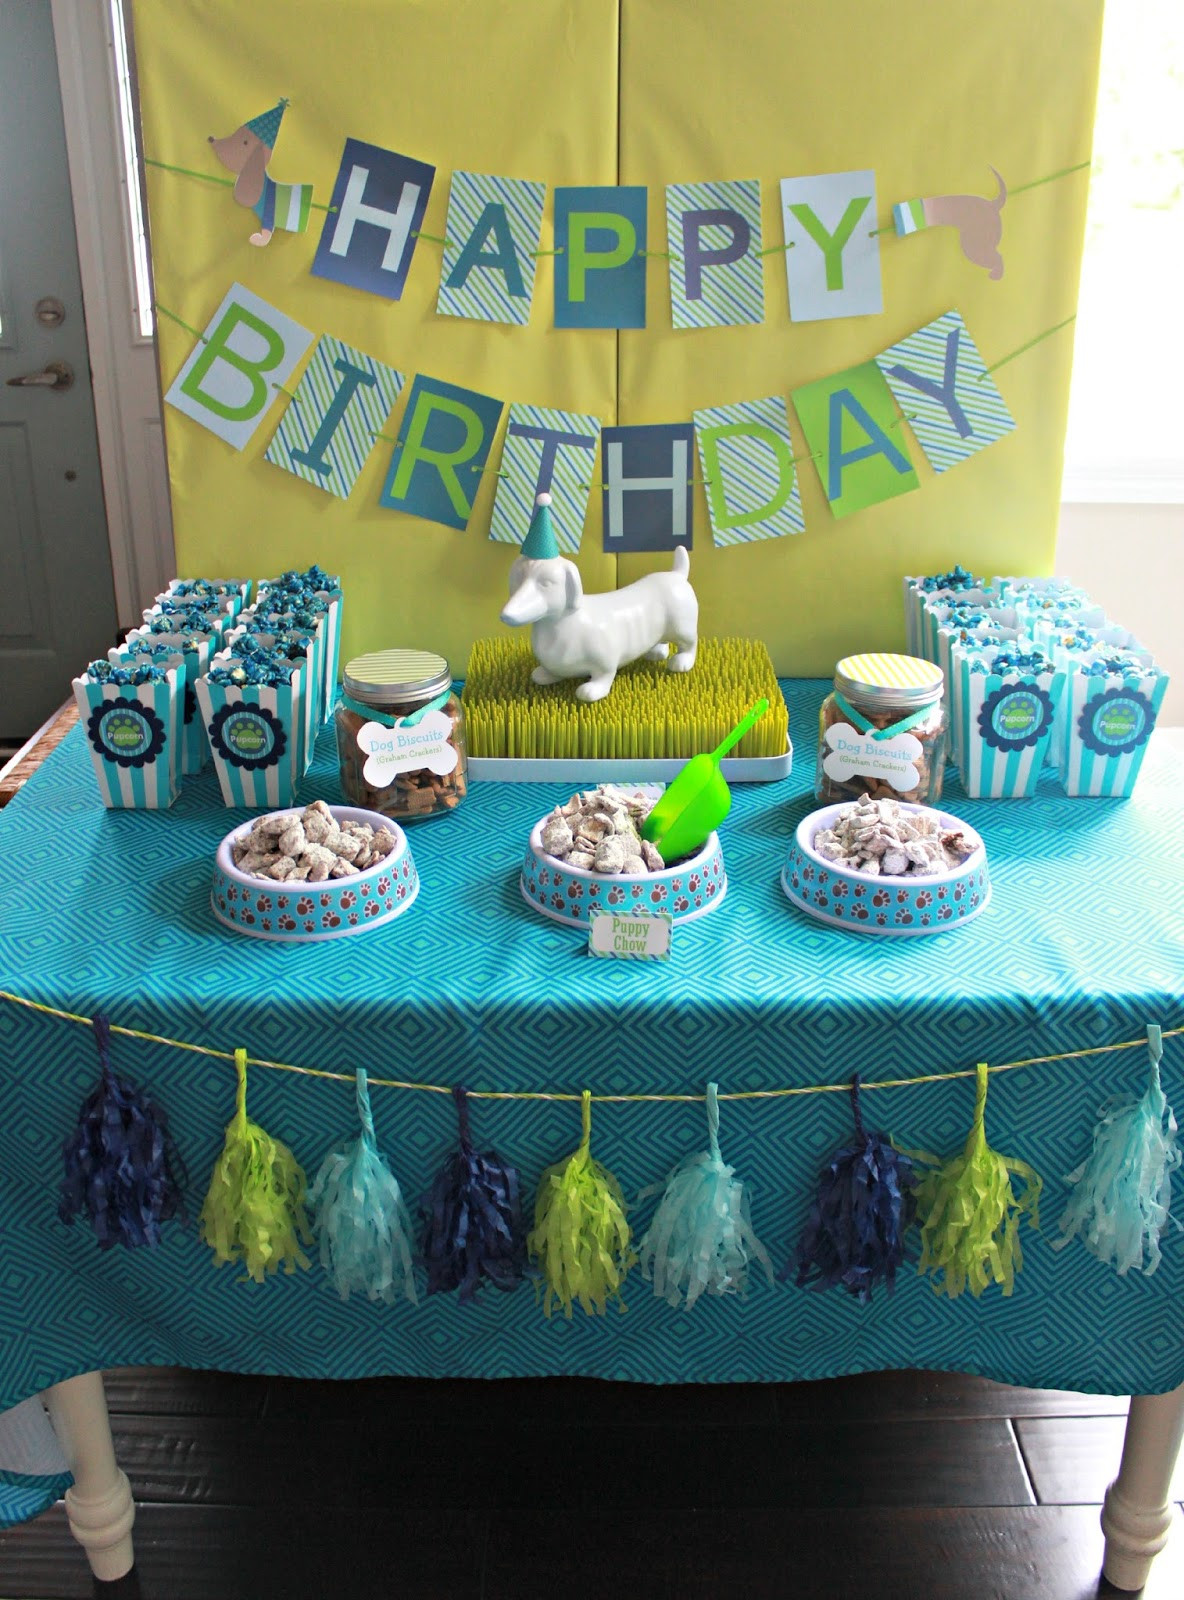 Puppy Birthday Party Supplies
 It s a Pawty Puppy Party First Birthday Part 1